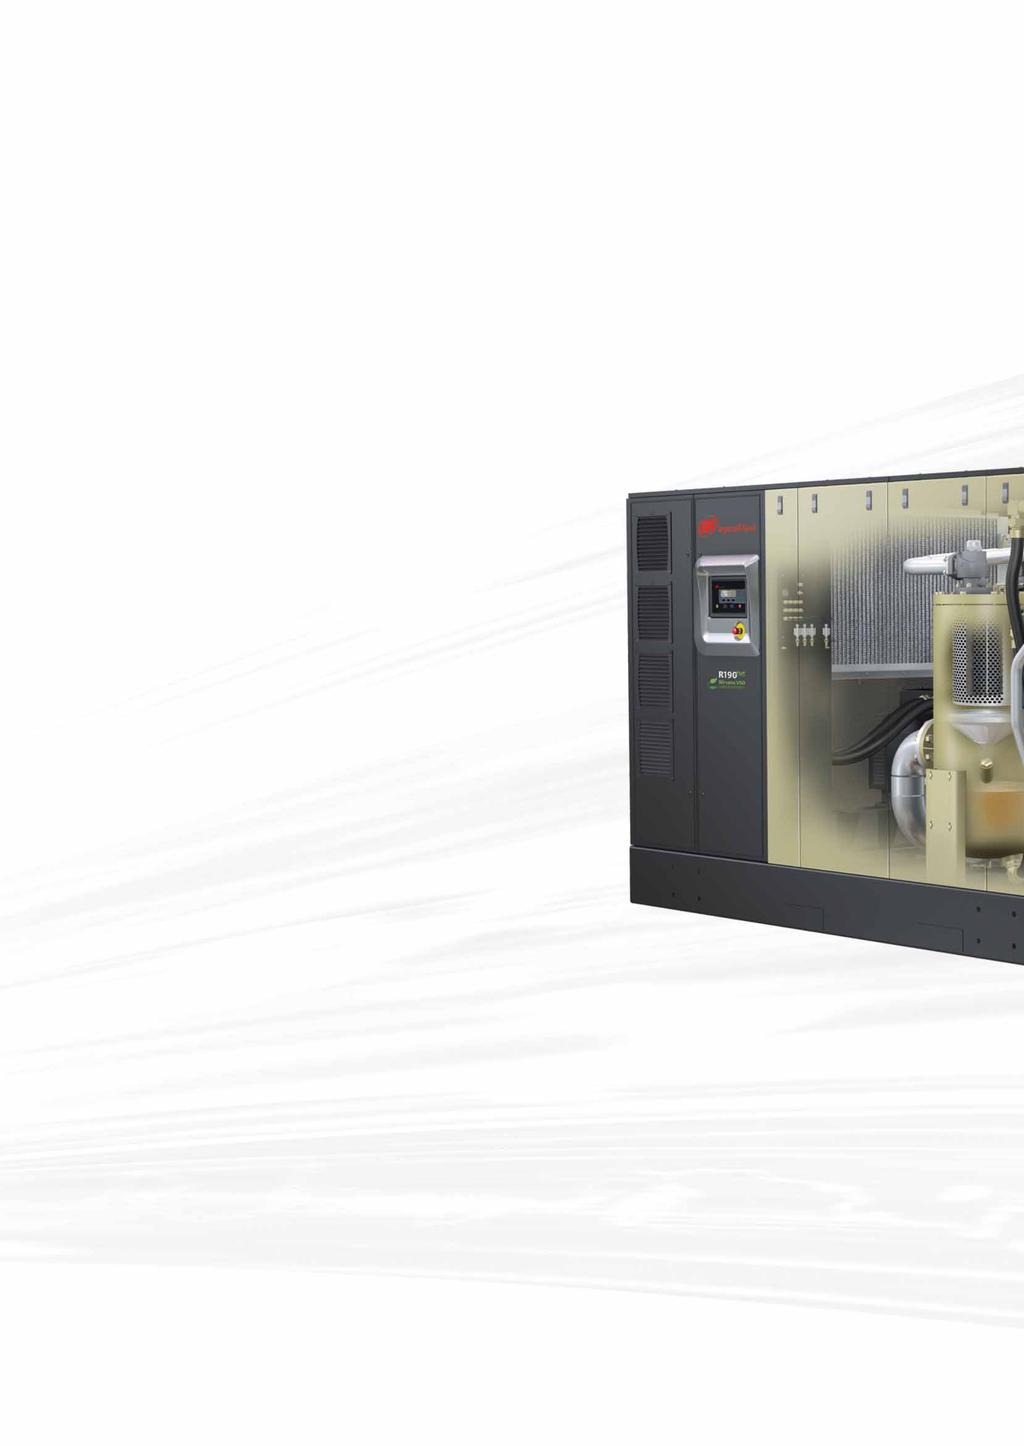 A New Level of Reliability, Efficiency and Nirvana 190-225 kw rotary air compressors offer the very best of time-proven designs and technologies with new, advanced features that ensure the highest